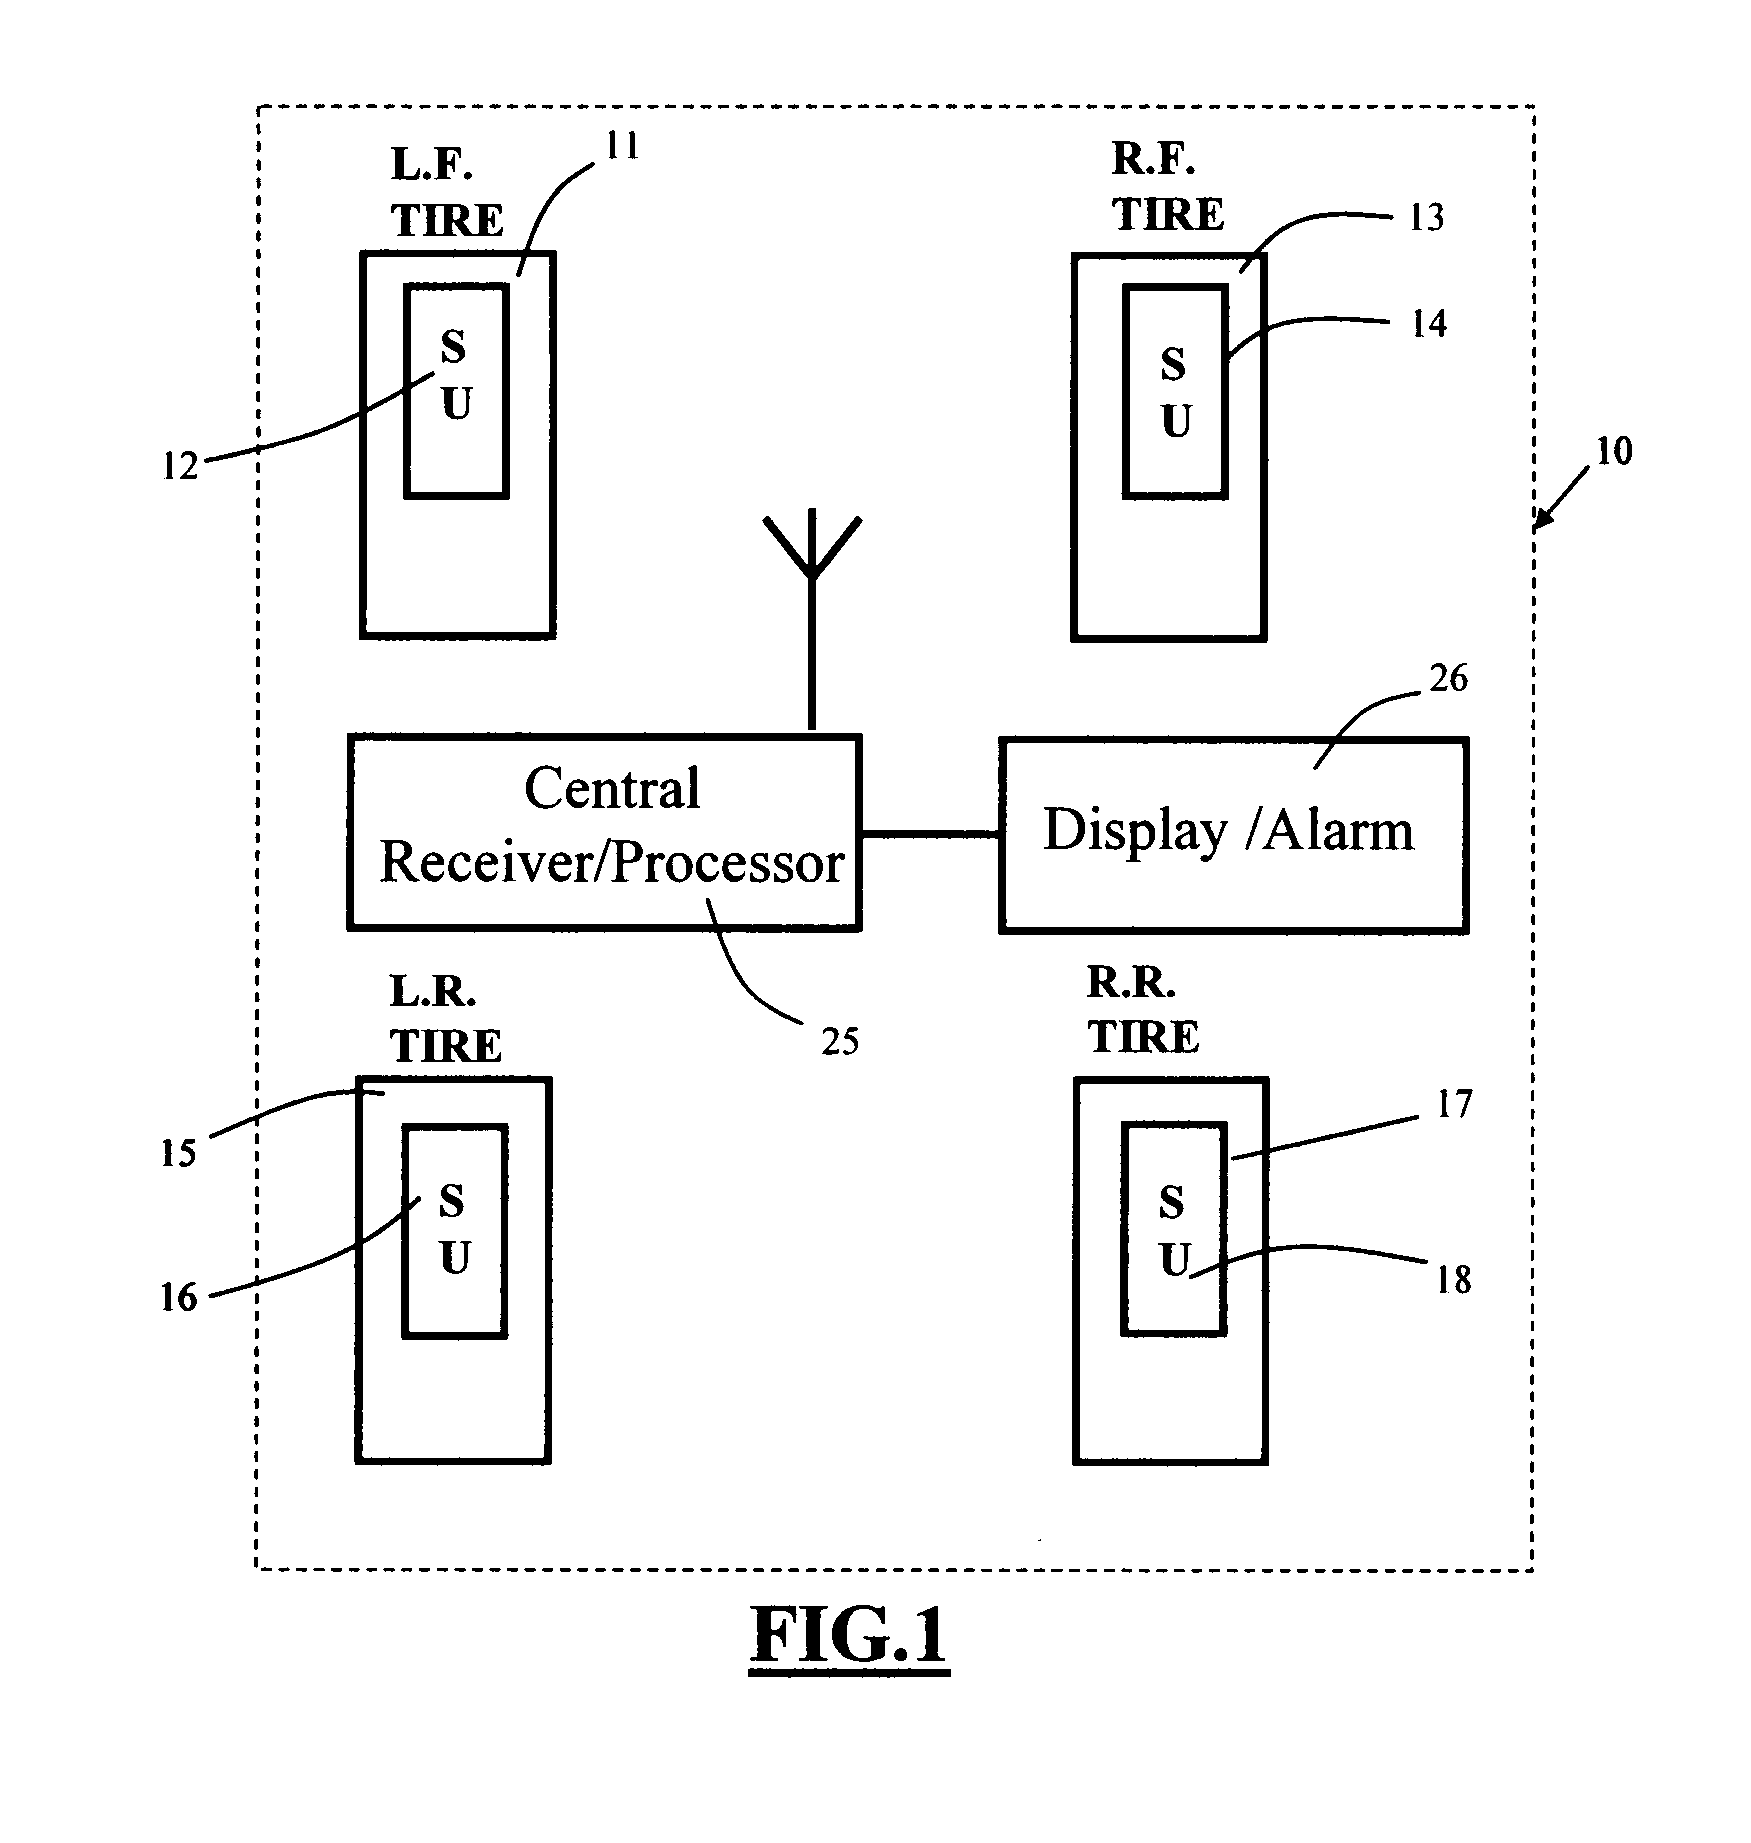 Tire parameter monitoring system with sensor location using magnetic fields